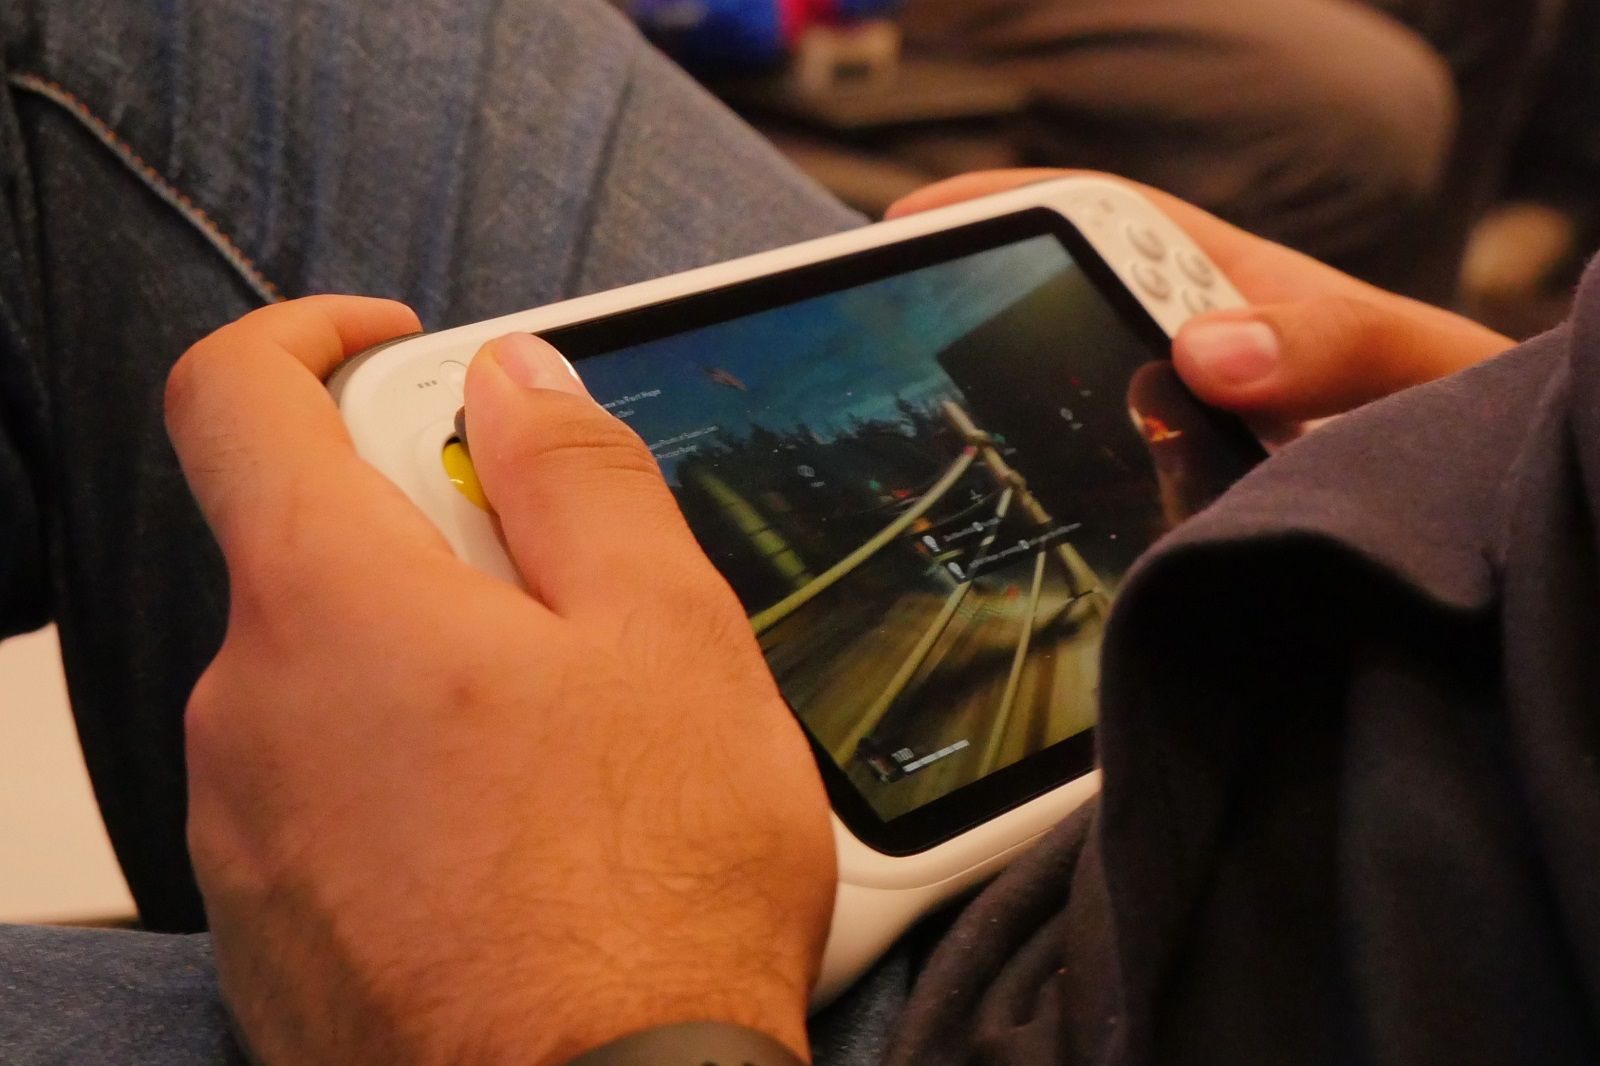 Logitech G Cloud-Gaming Handheld initial hands-on experience